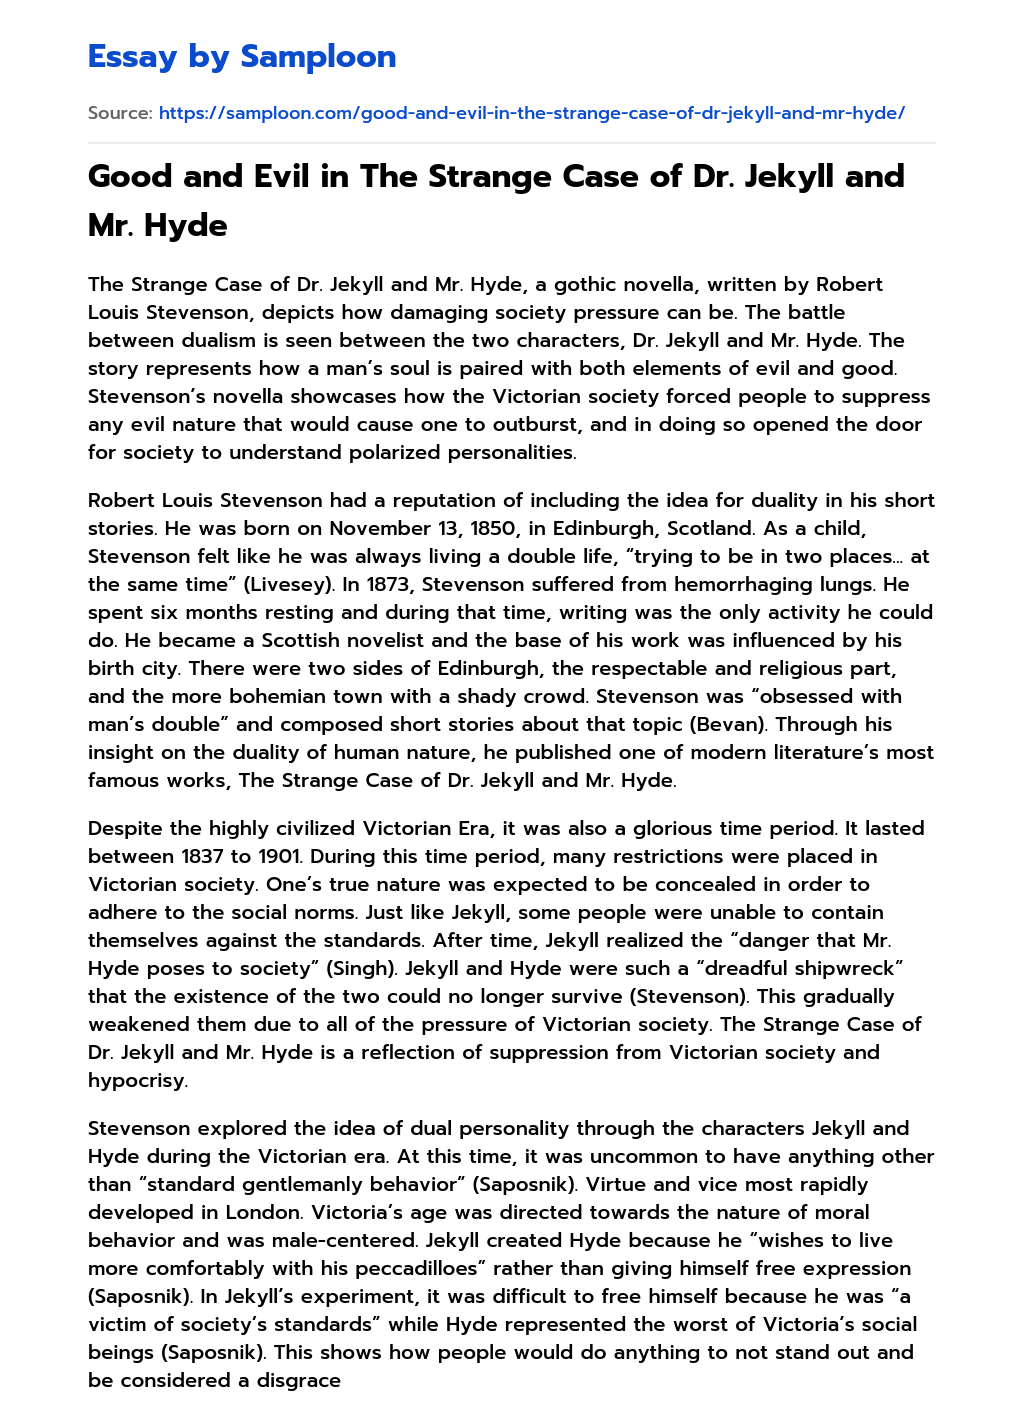 Good and Evil in The Strange Case of Dr. Jekyll and Mr. Hyde essay